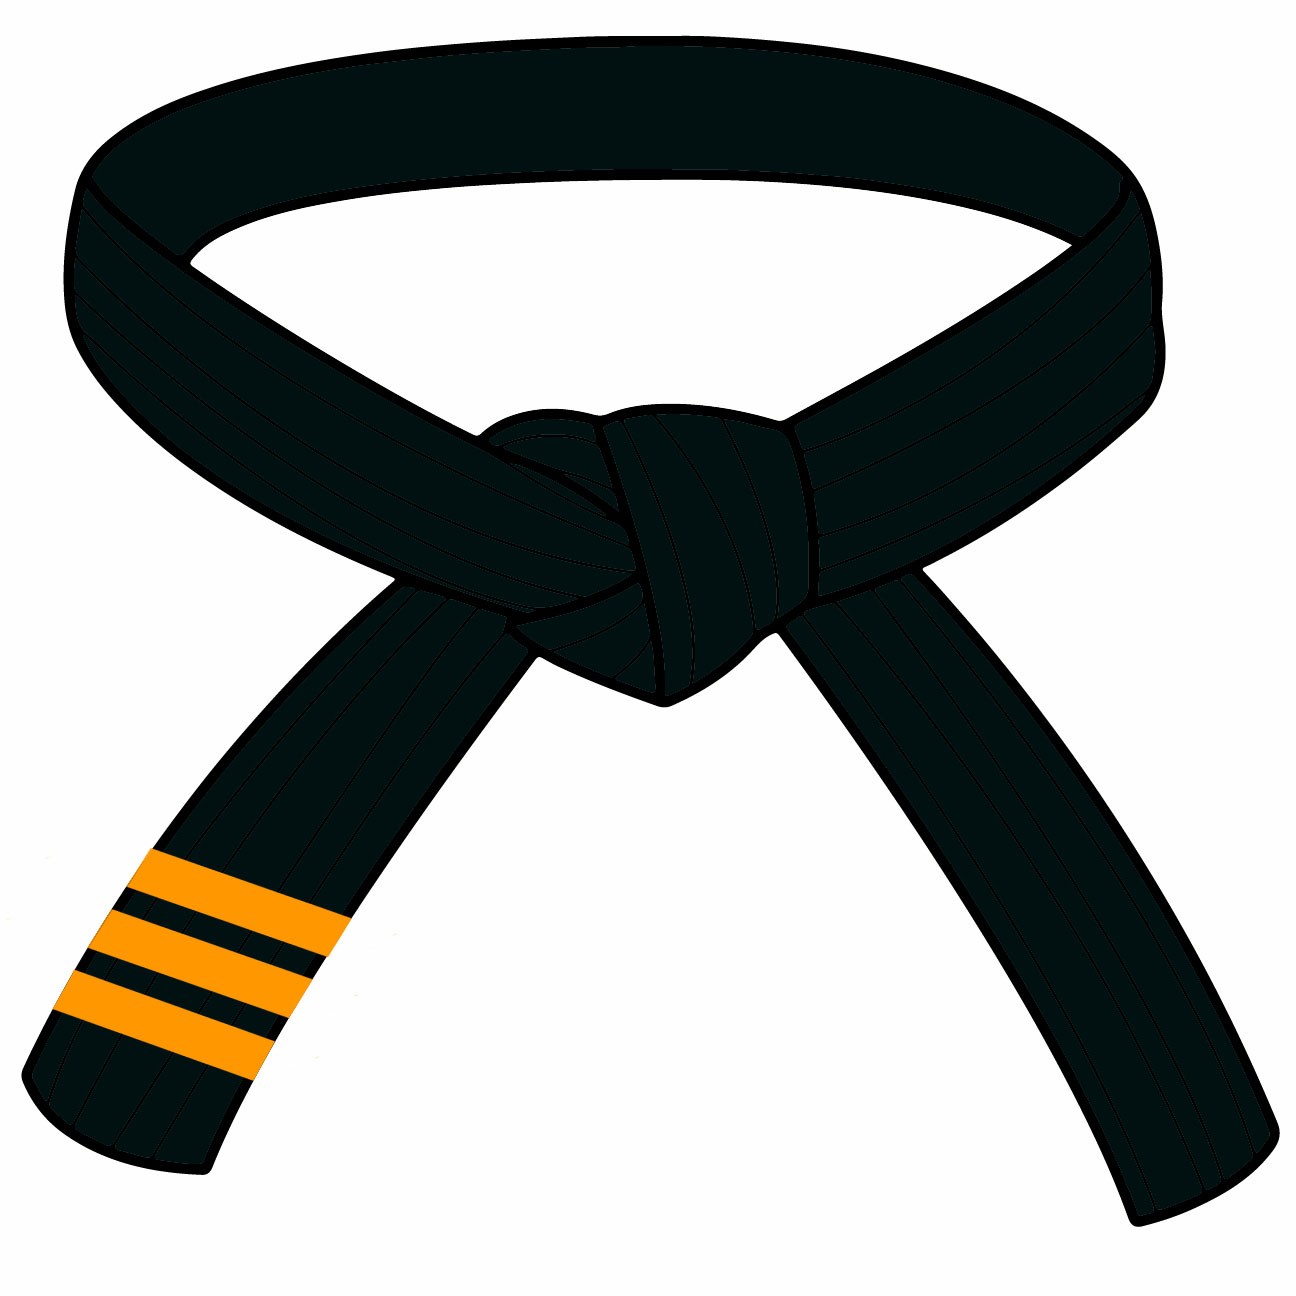 Karate Clipart Black Belt and other clipart images on Cliparts pub™